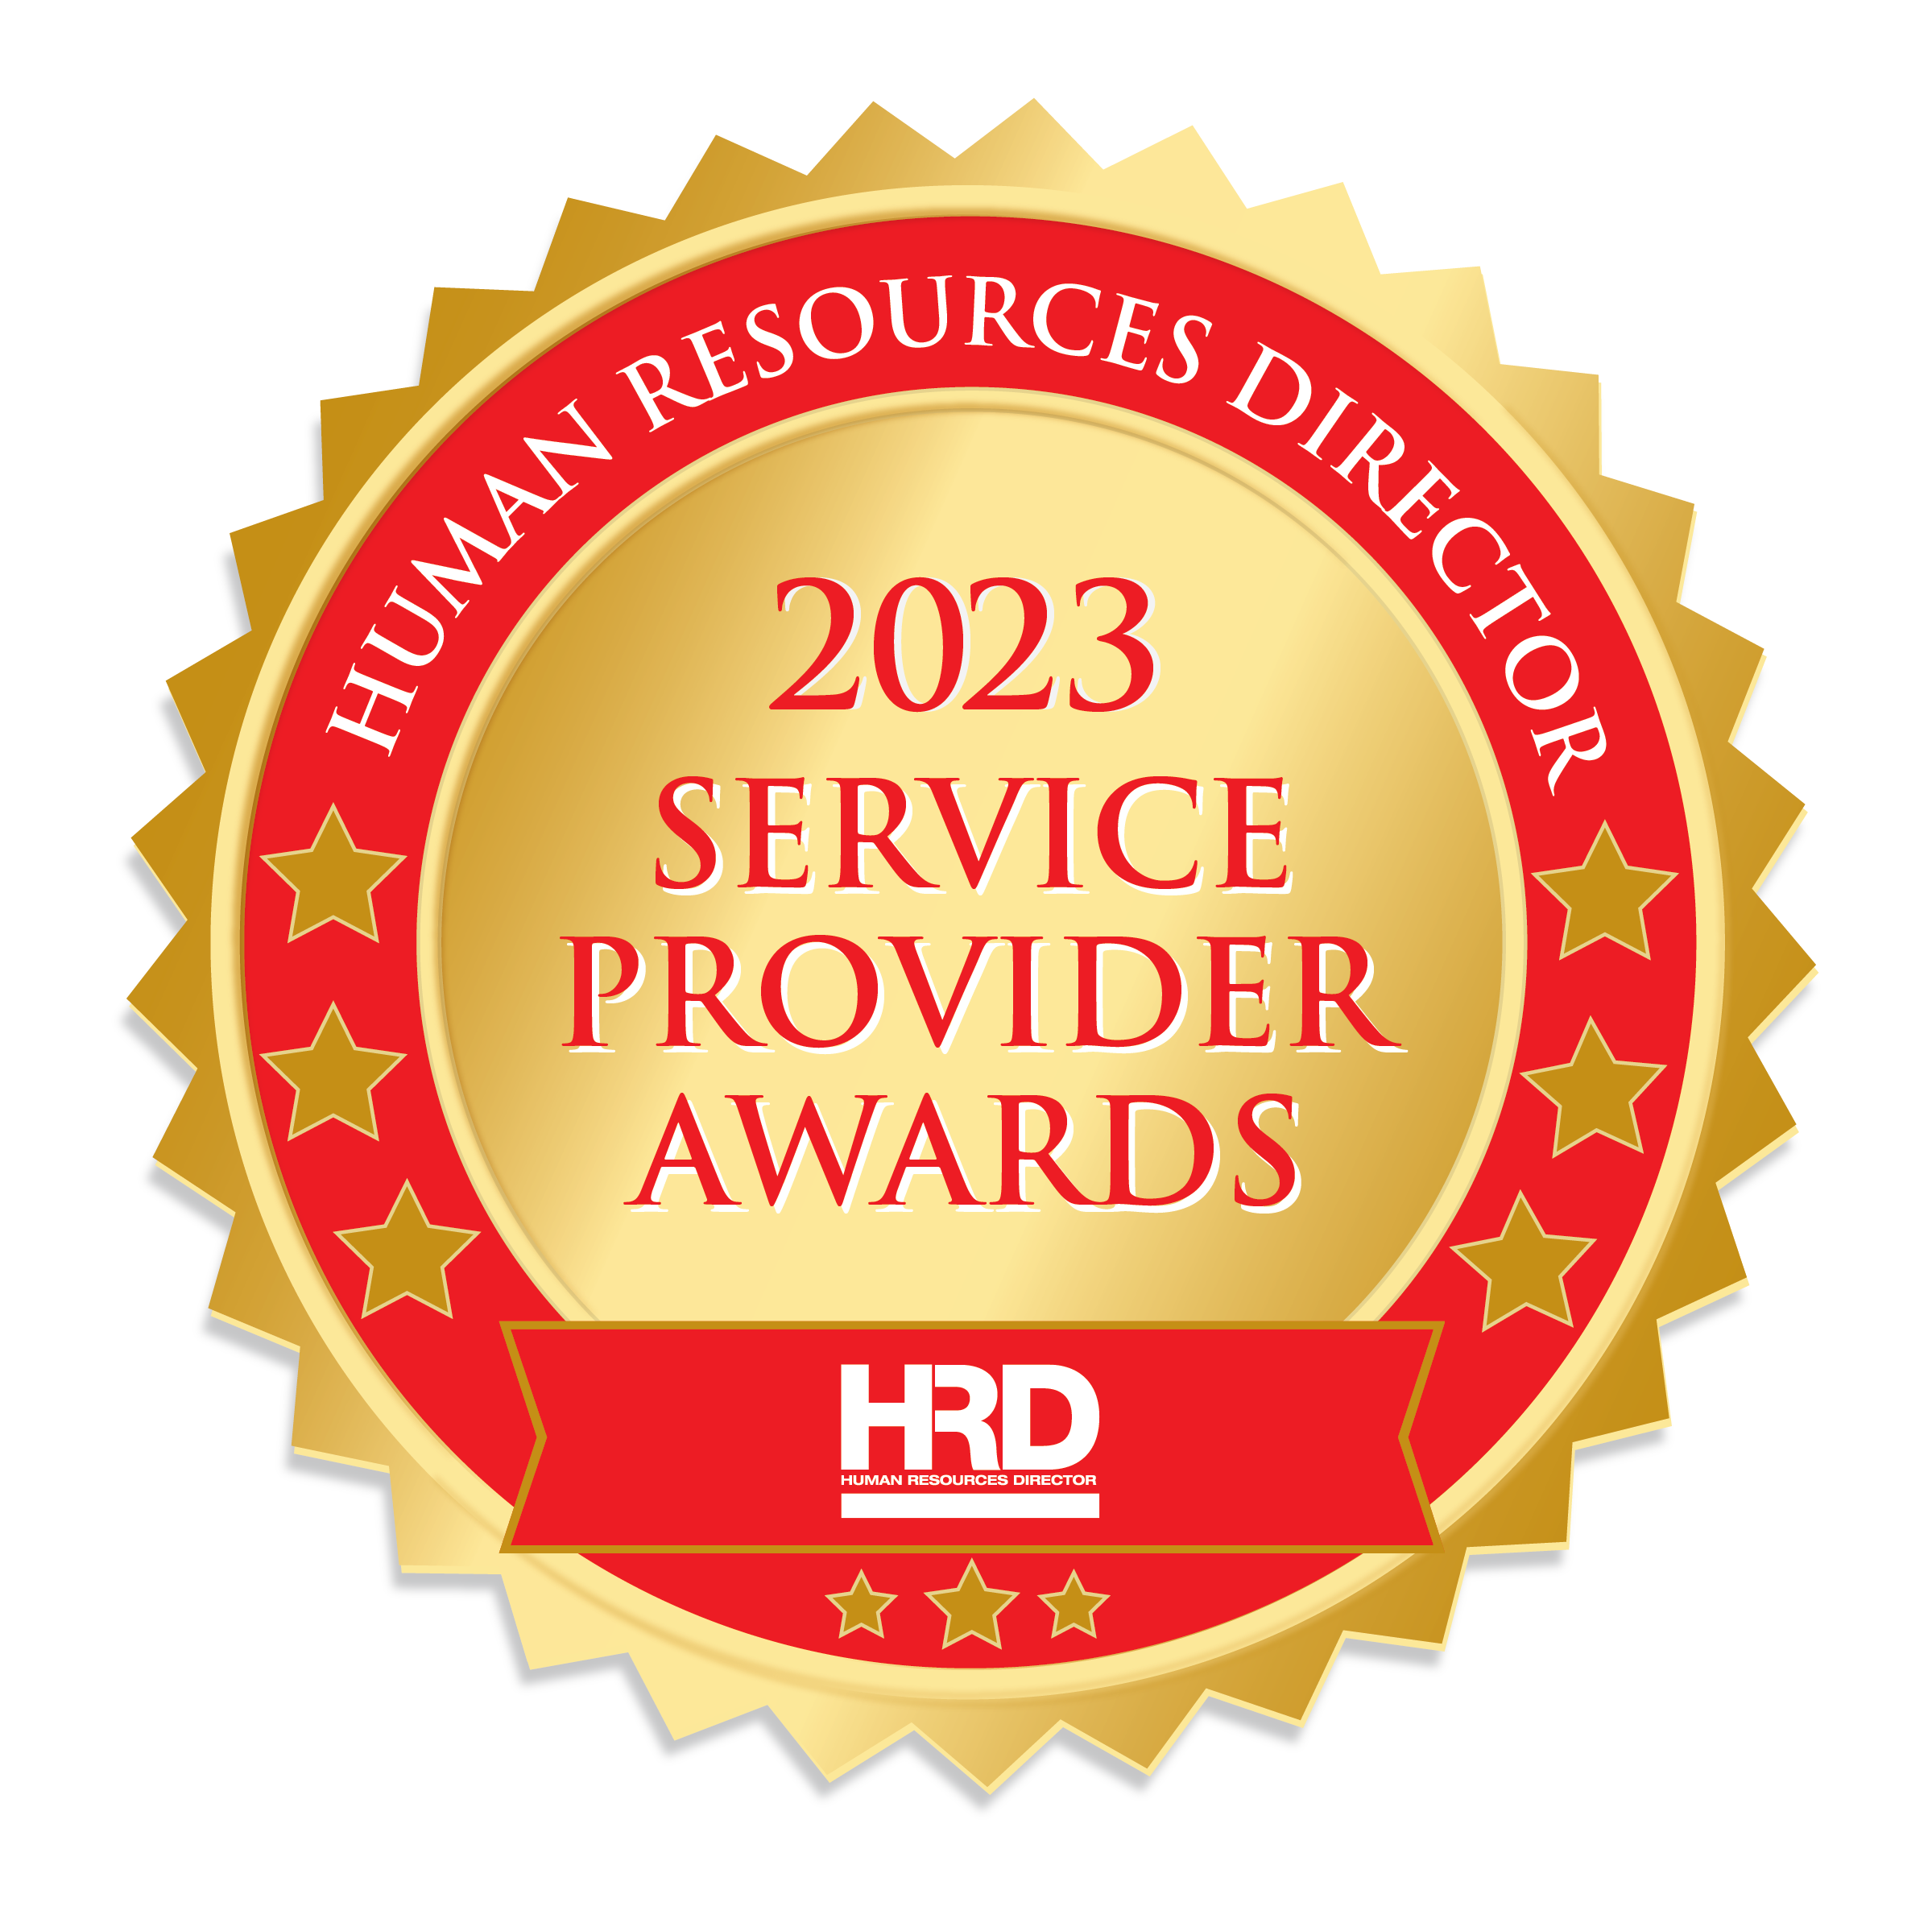 Best HR Service Providers in Australia and New Zealand | Service Provider Awards 2023